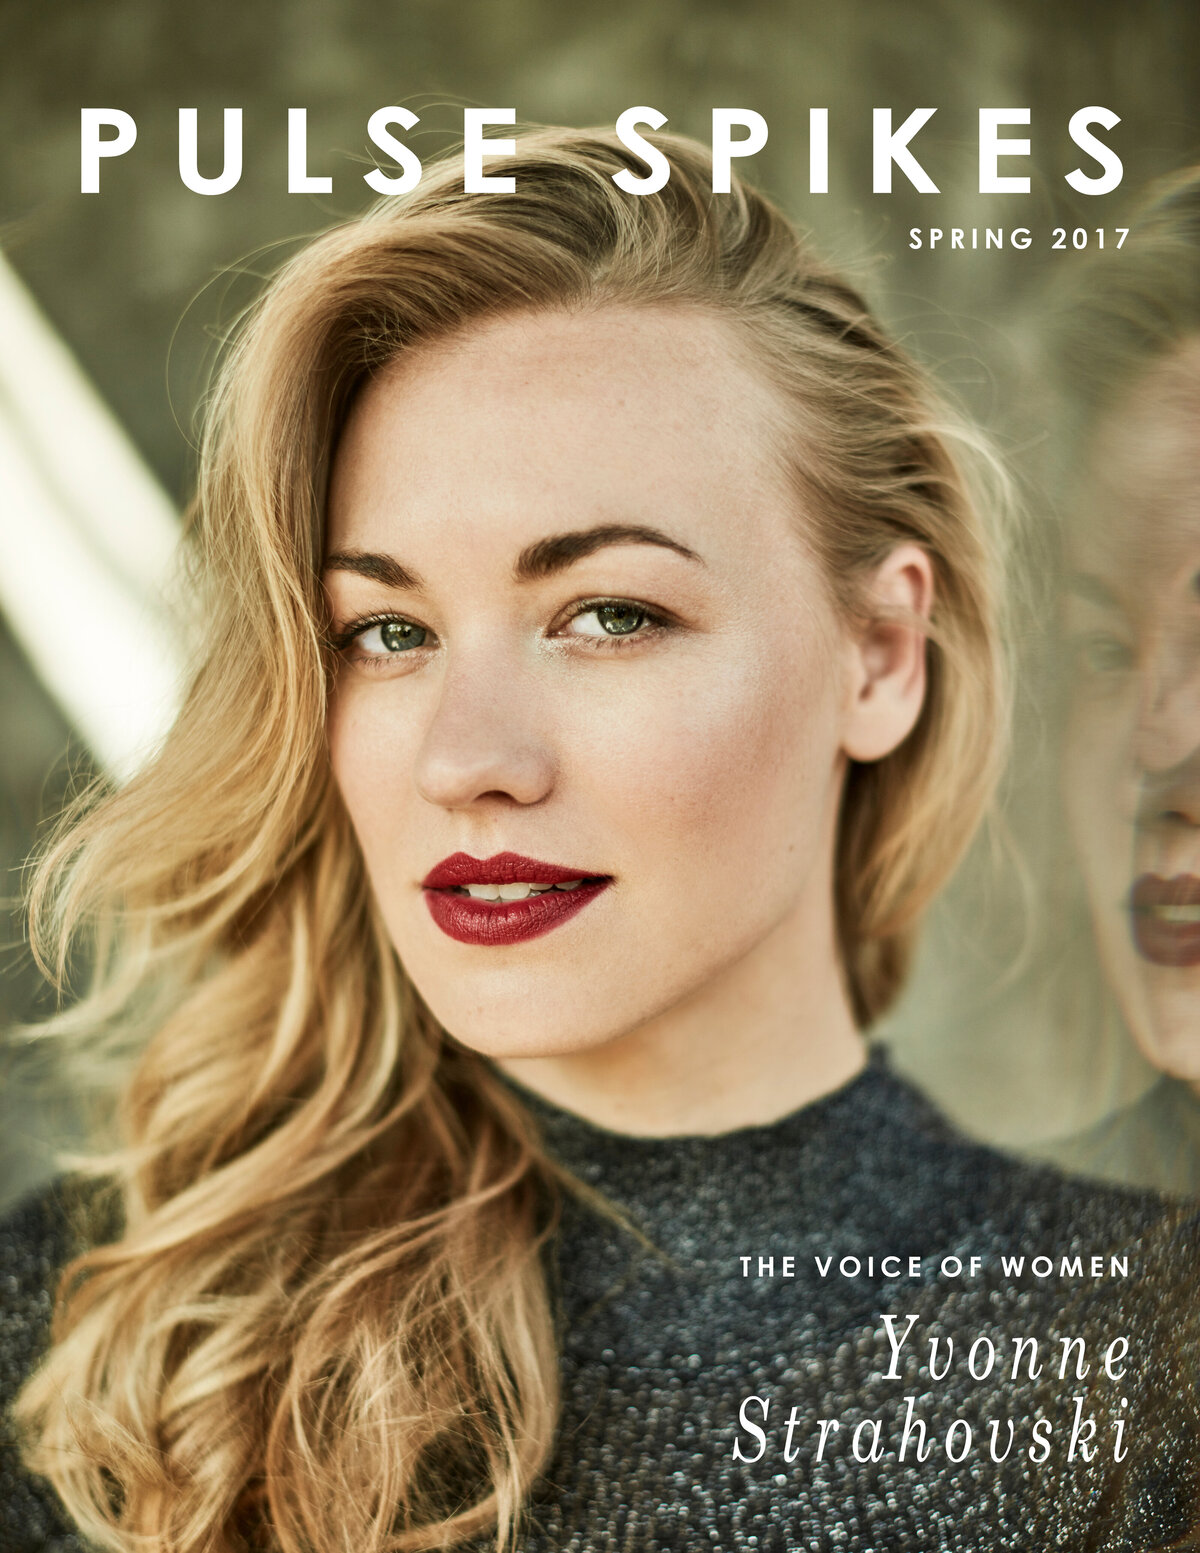 Yvonne Strahovski  on the cover of Pulse Spike magazine in red lipstick